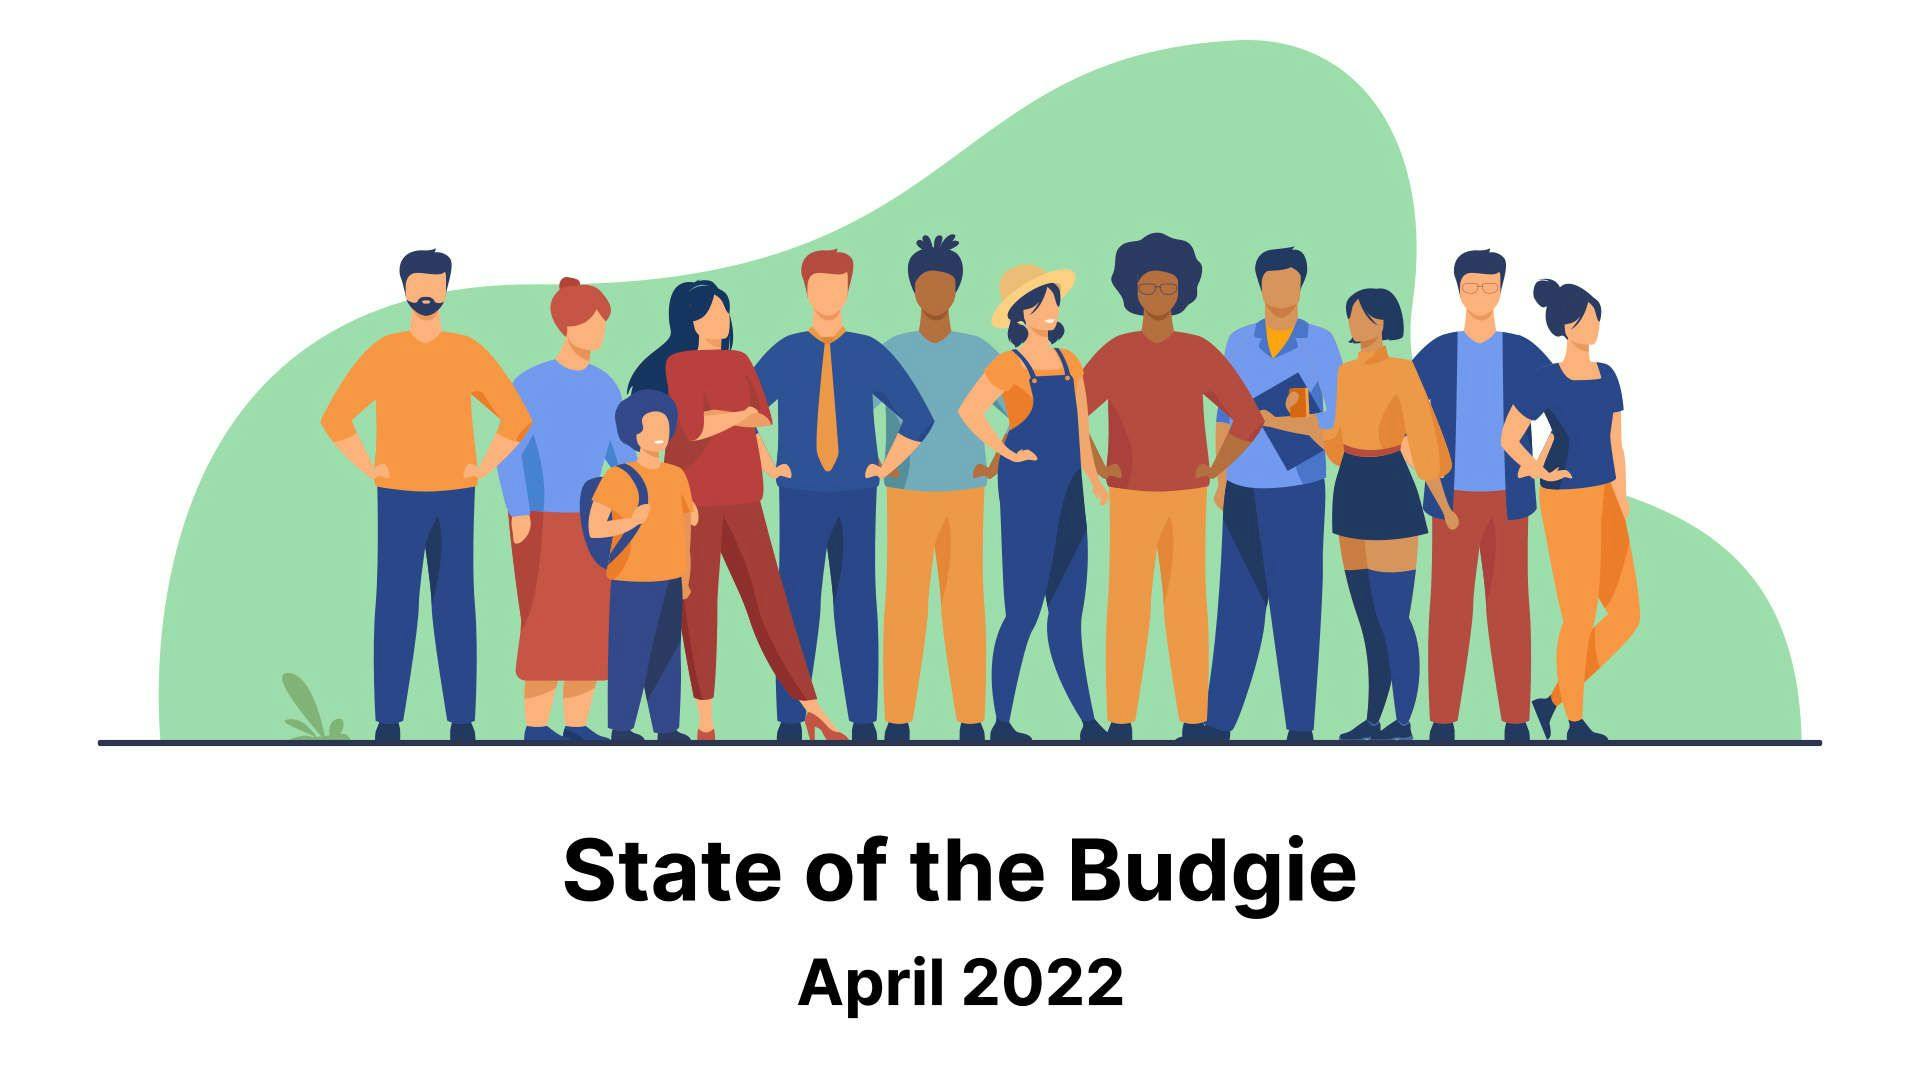 State of the Budgie: April 2022